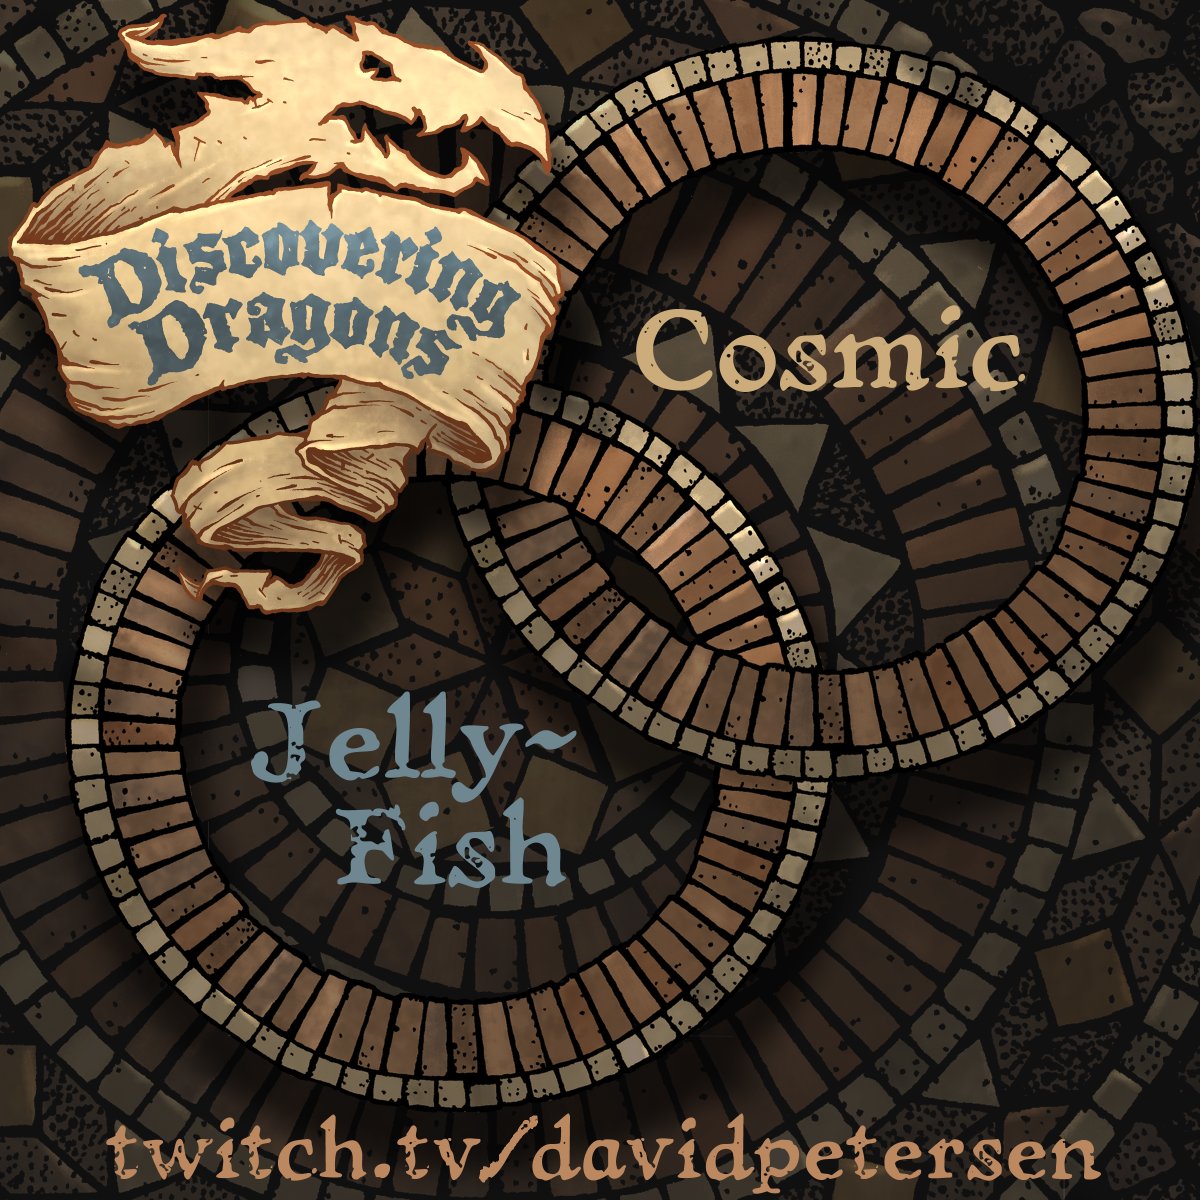 April's #DiscoveringDragons prompts are Cosmic & Jellyfish! Come draw with me: twitch.tv/davidpetersen